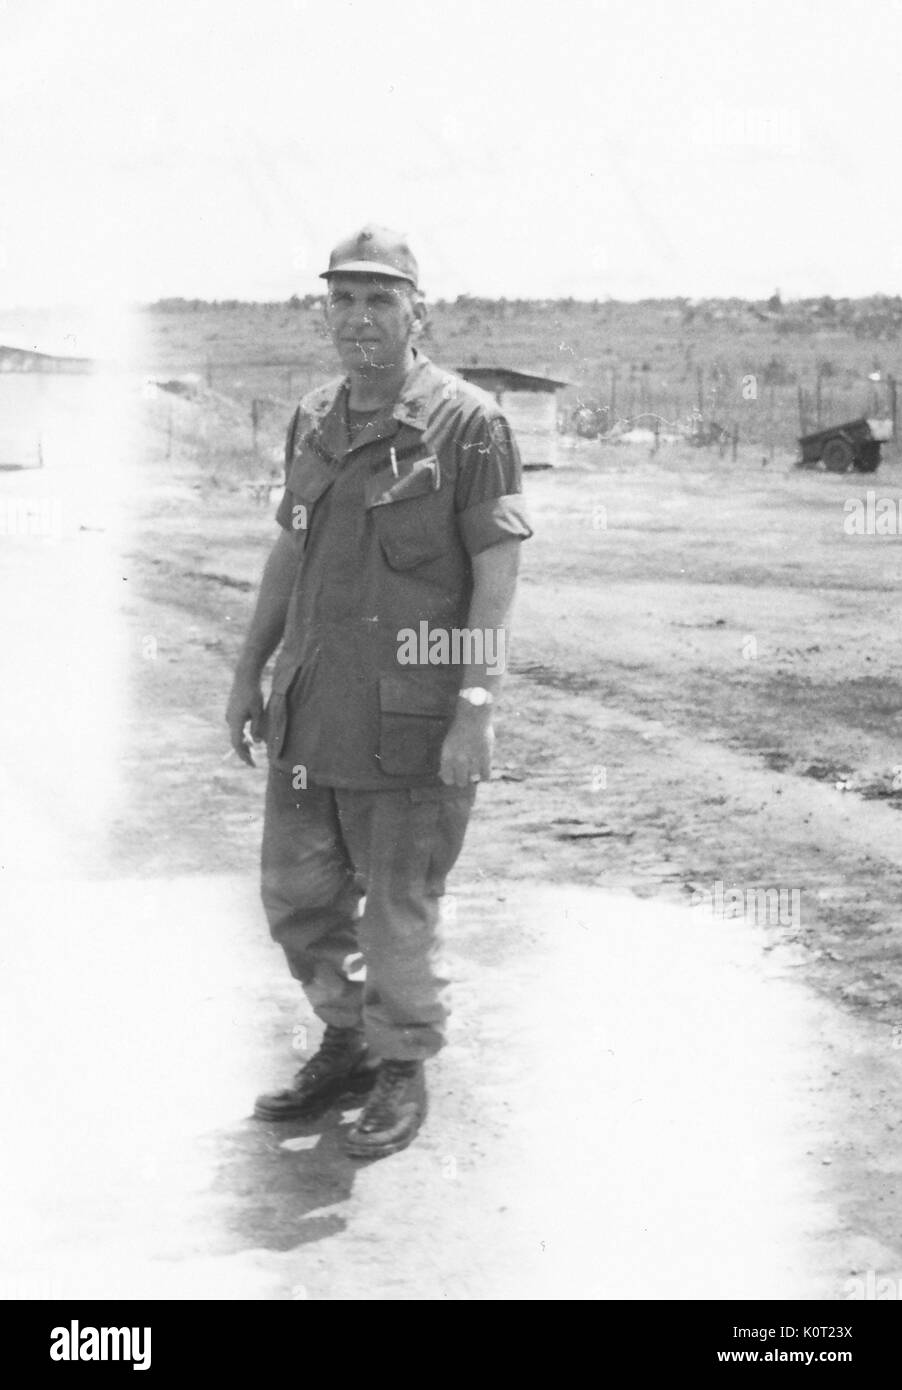 American servicemen Raymond Bergeson standing in military uniform in an airfield in Vietnam during the Vietnam War, a member of Team 3, 1964. Stock Photo